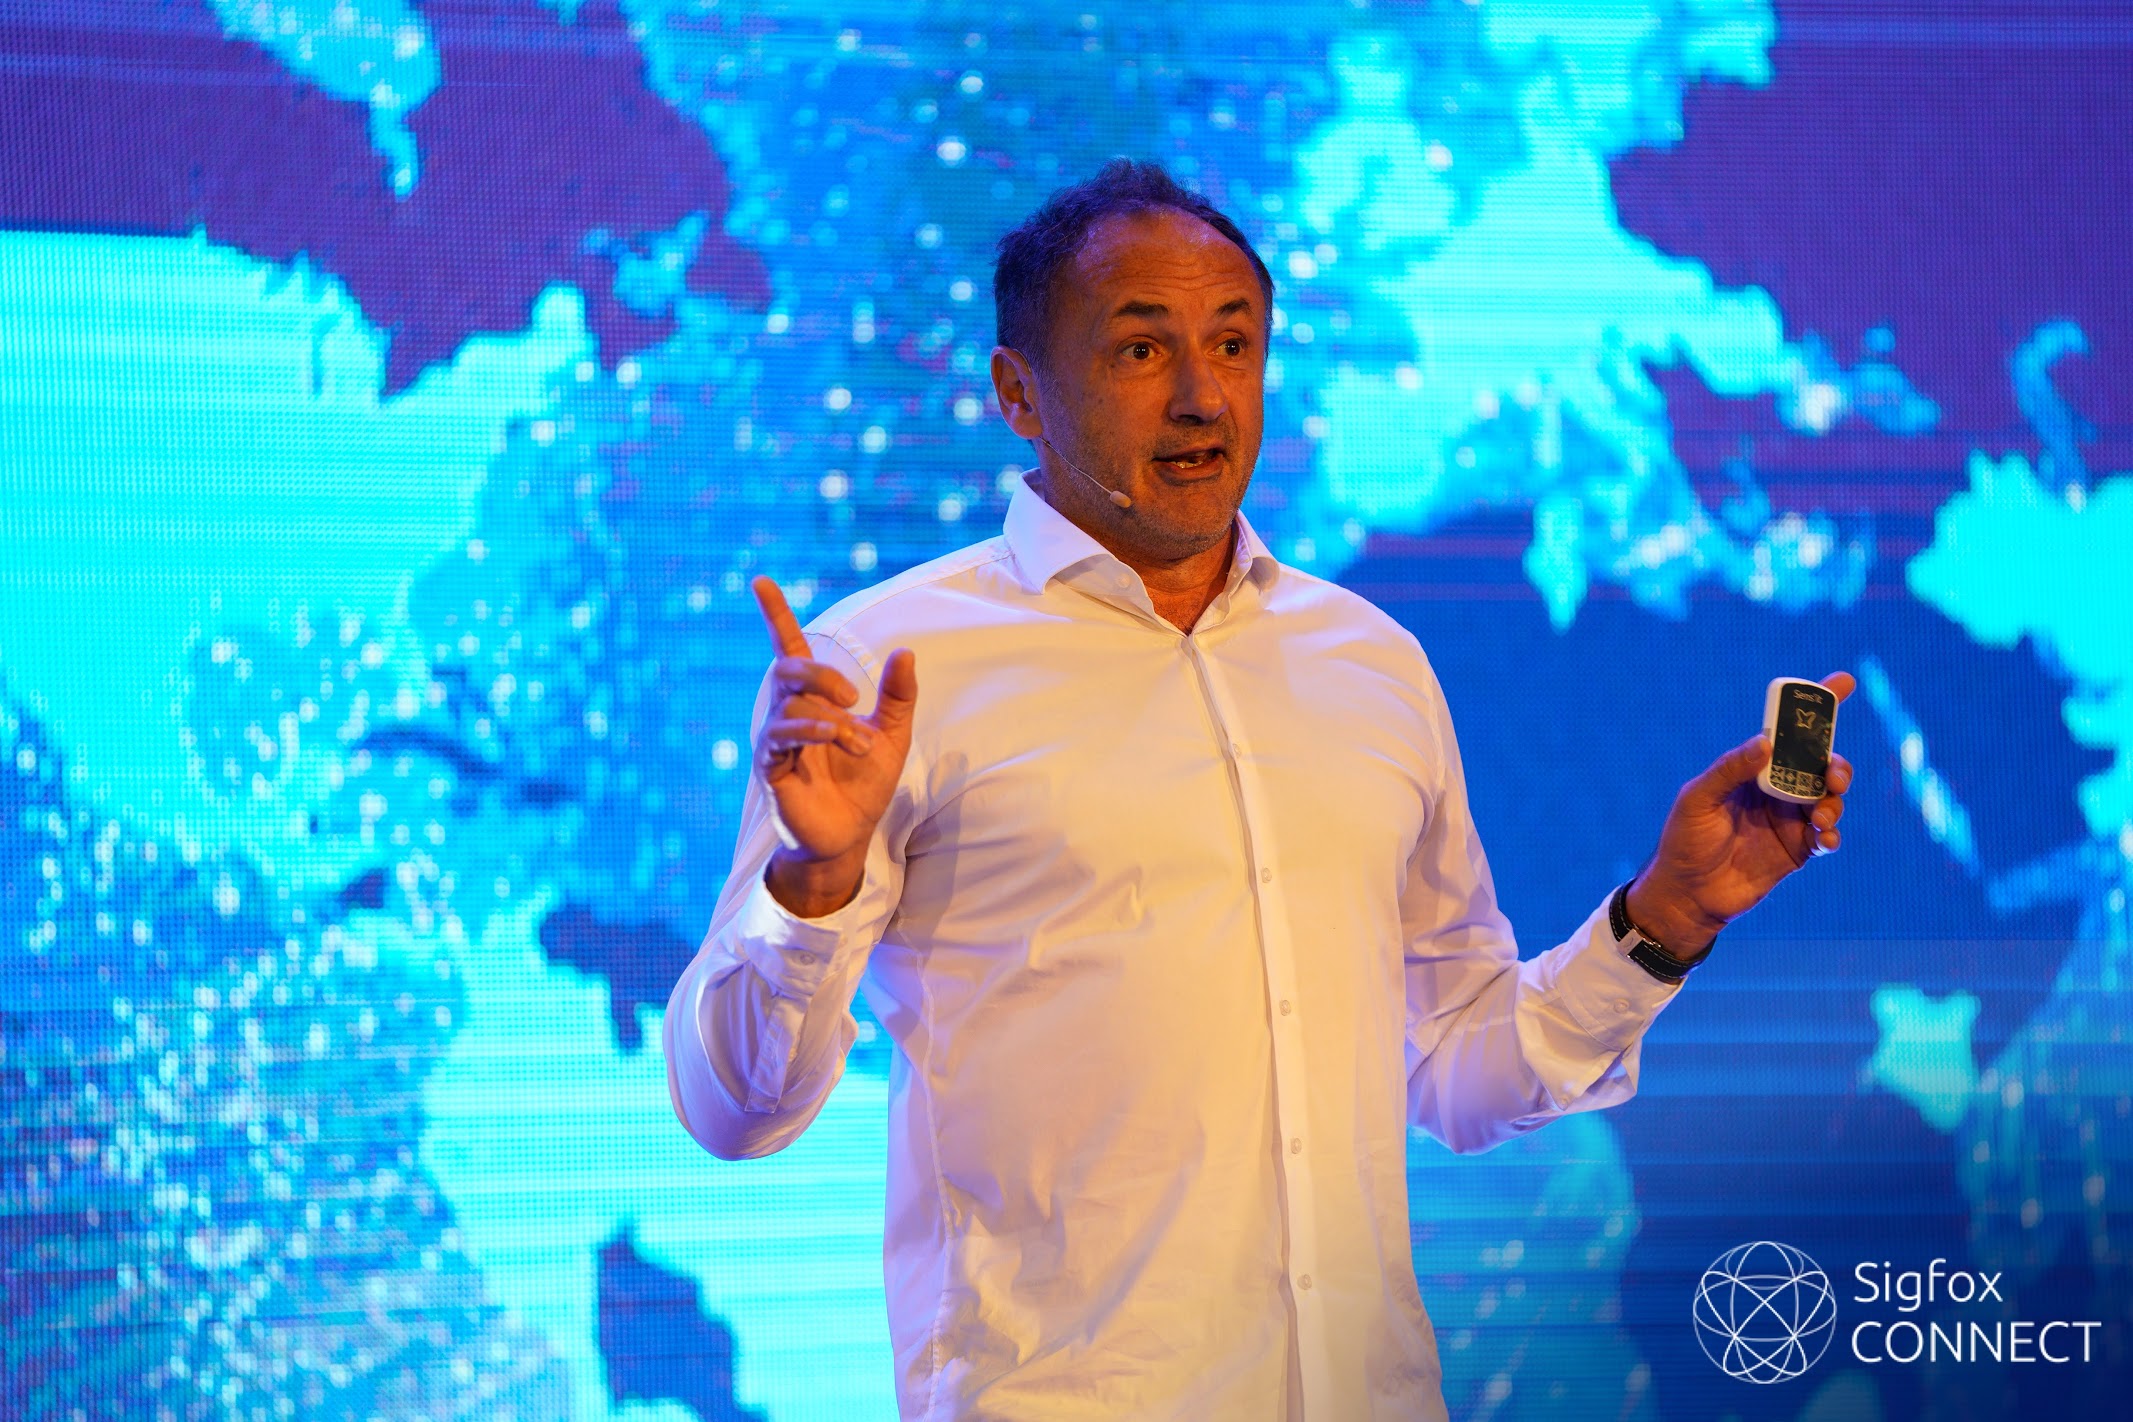 Ludovic LeMoan on the #SigfoxConnect in Singapore: “Join the #0G revolution”